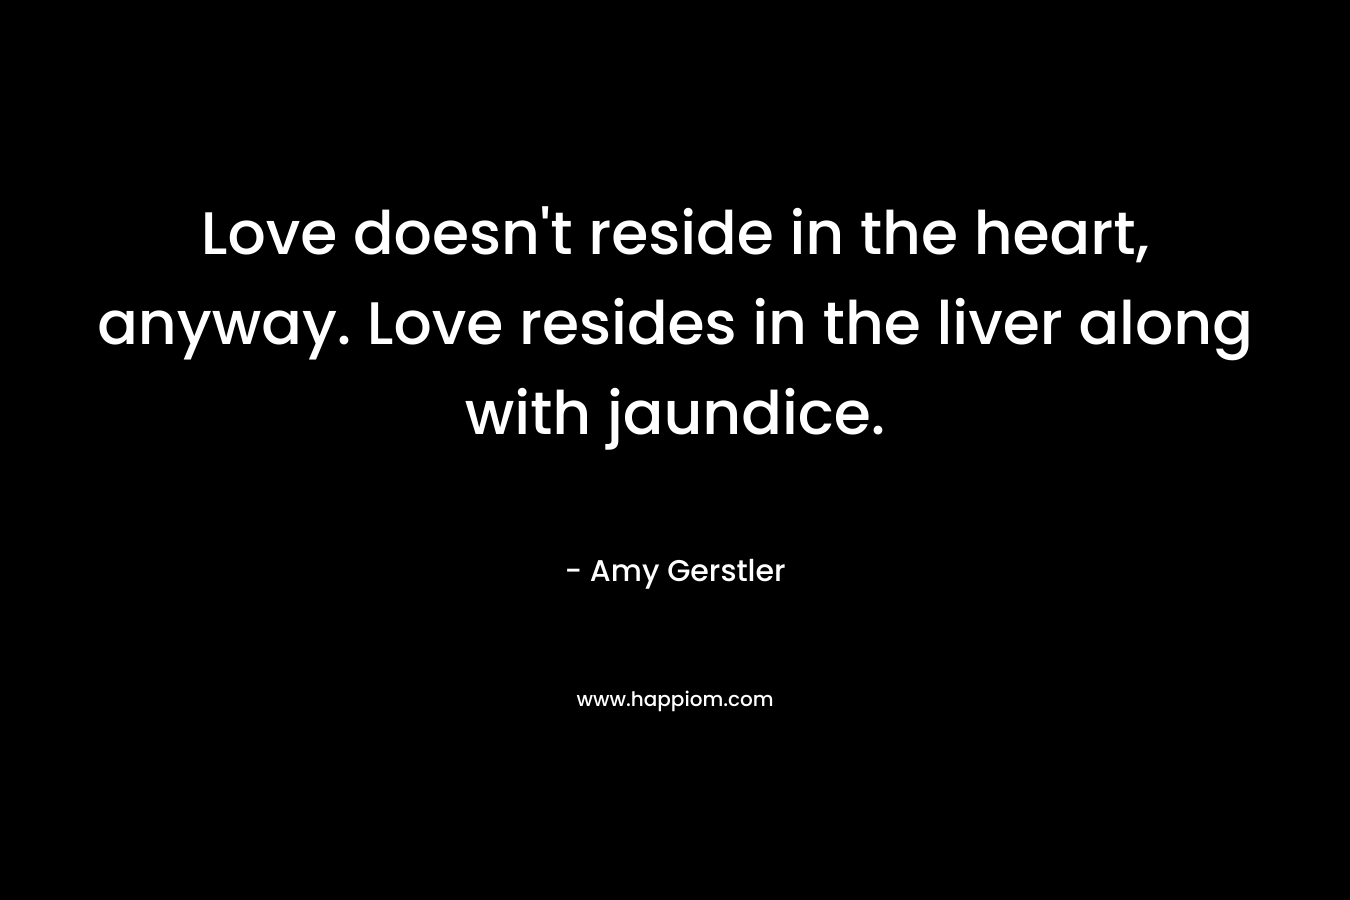 Love doesn't reside in the heart, anyway. Love resides in the liver along with jaundice.